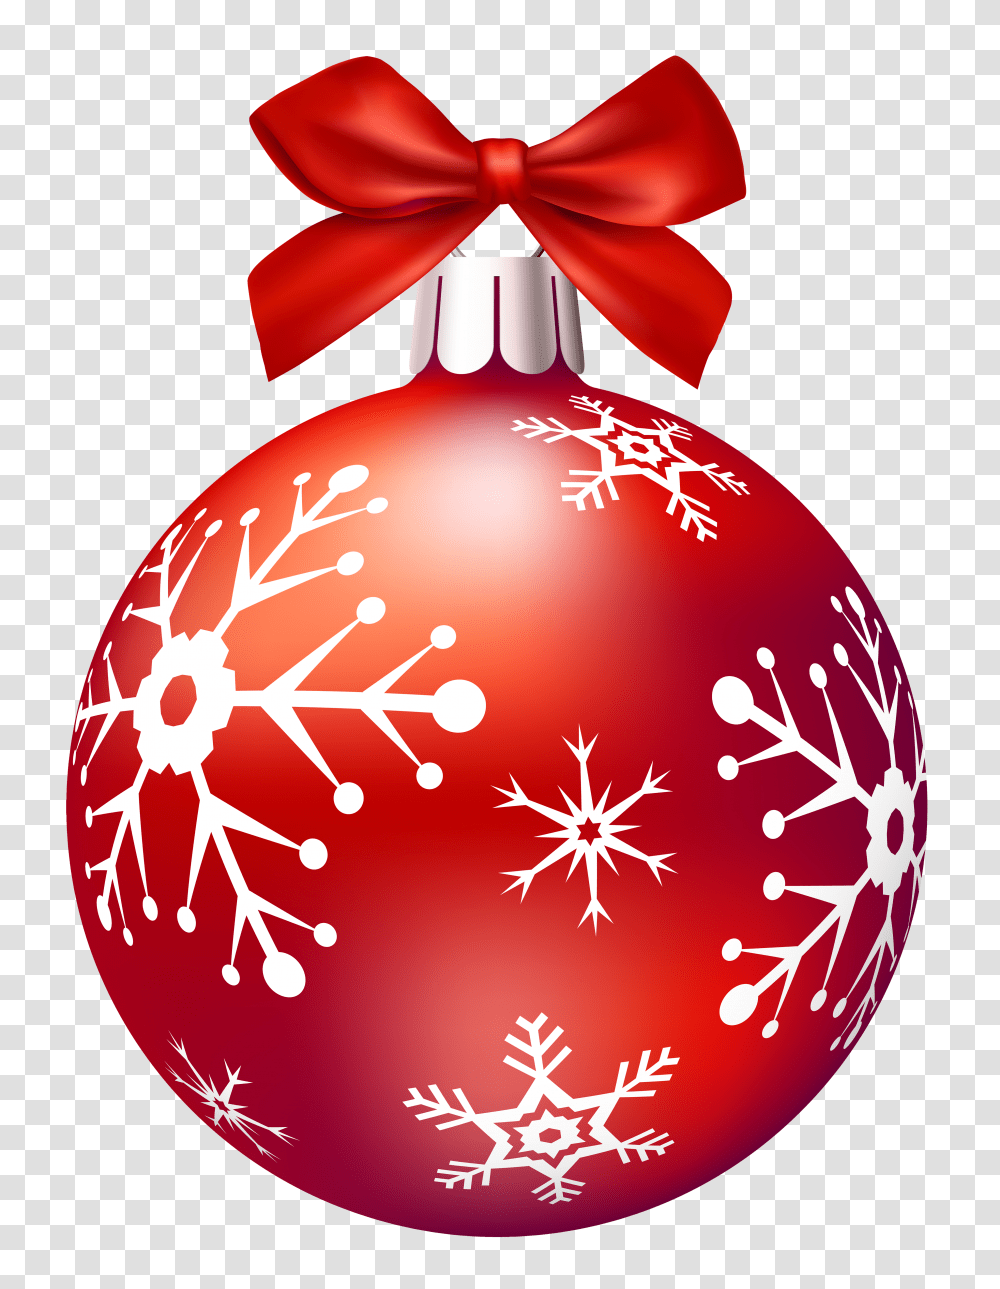 Red Christmas Balls Clip Art The Red Christmas Ball Clipart, Graphics, Floral Design, Pattern, Flare Transparent Png